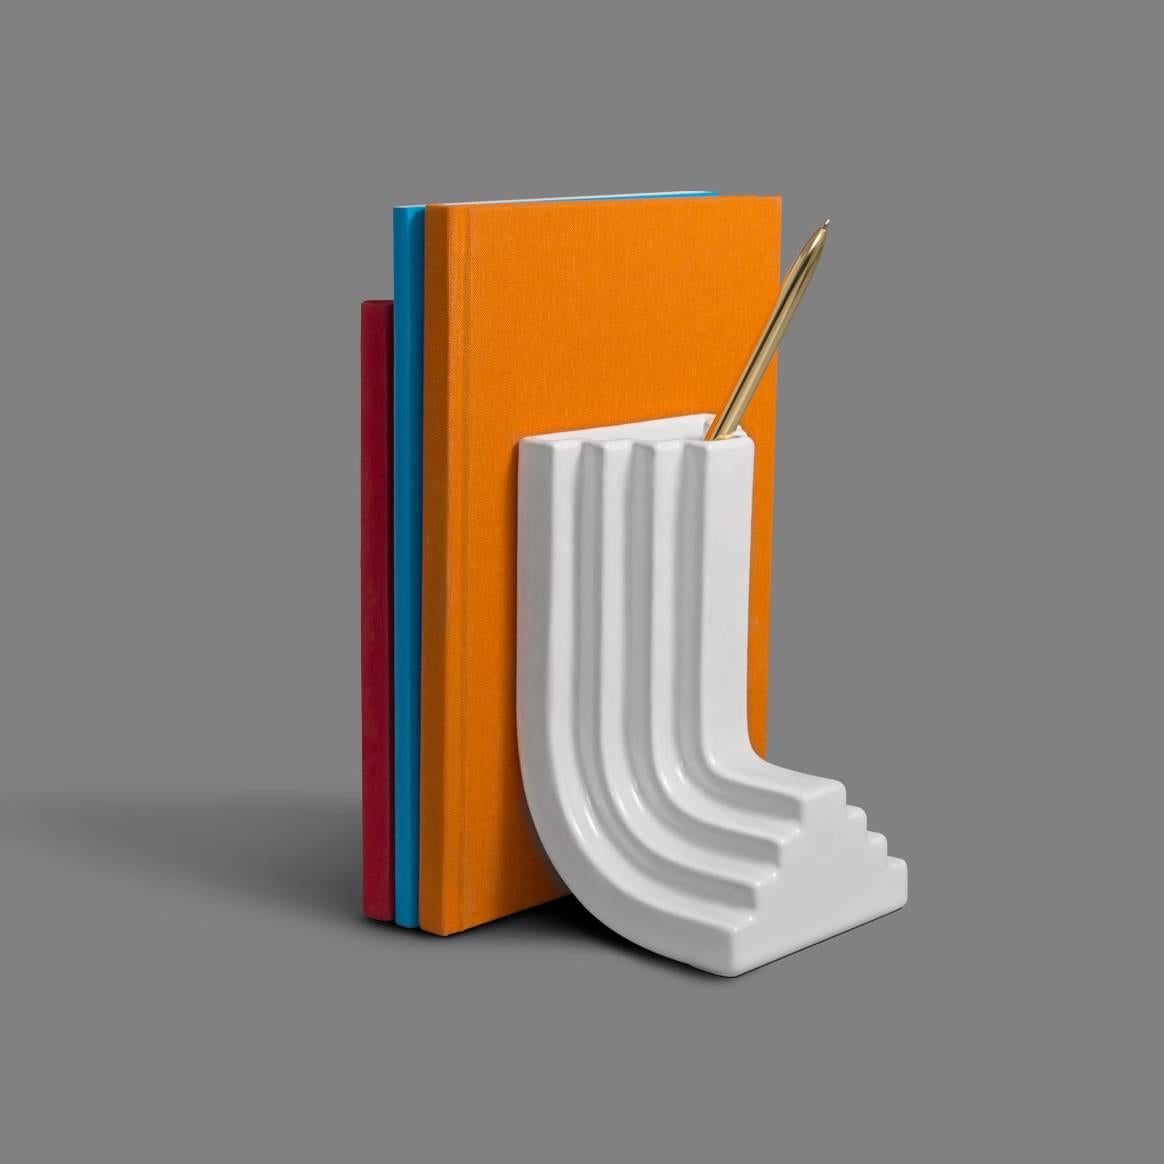 This bookend is a playful take on the various scales of design experience. While it is a tabletop item, its form references the monolithic nature of large-scale architecture. Its shape is inspired by the building elements and aesthetic features of